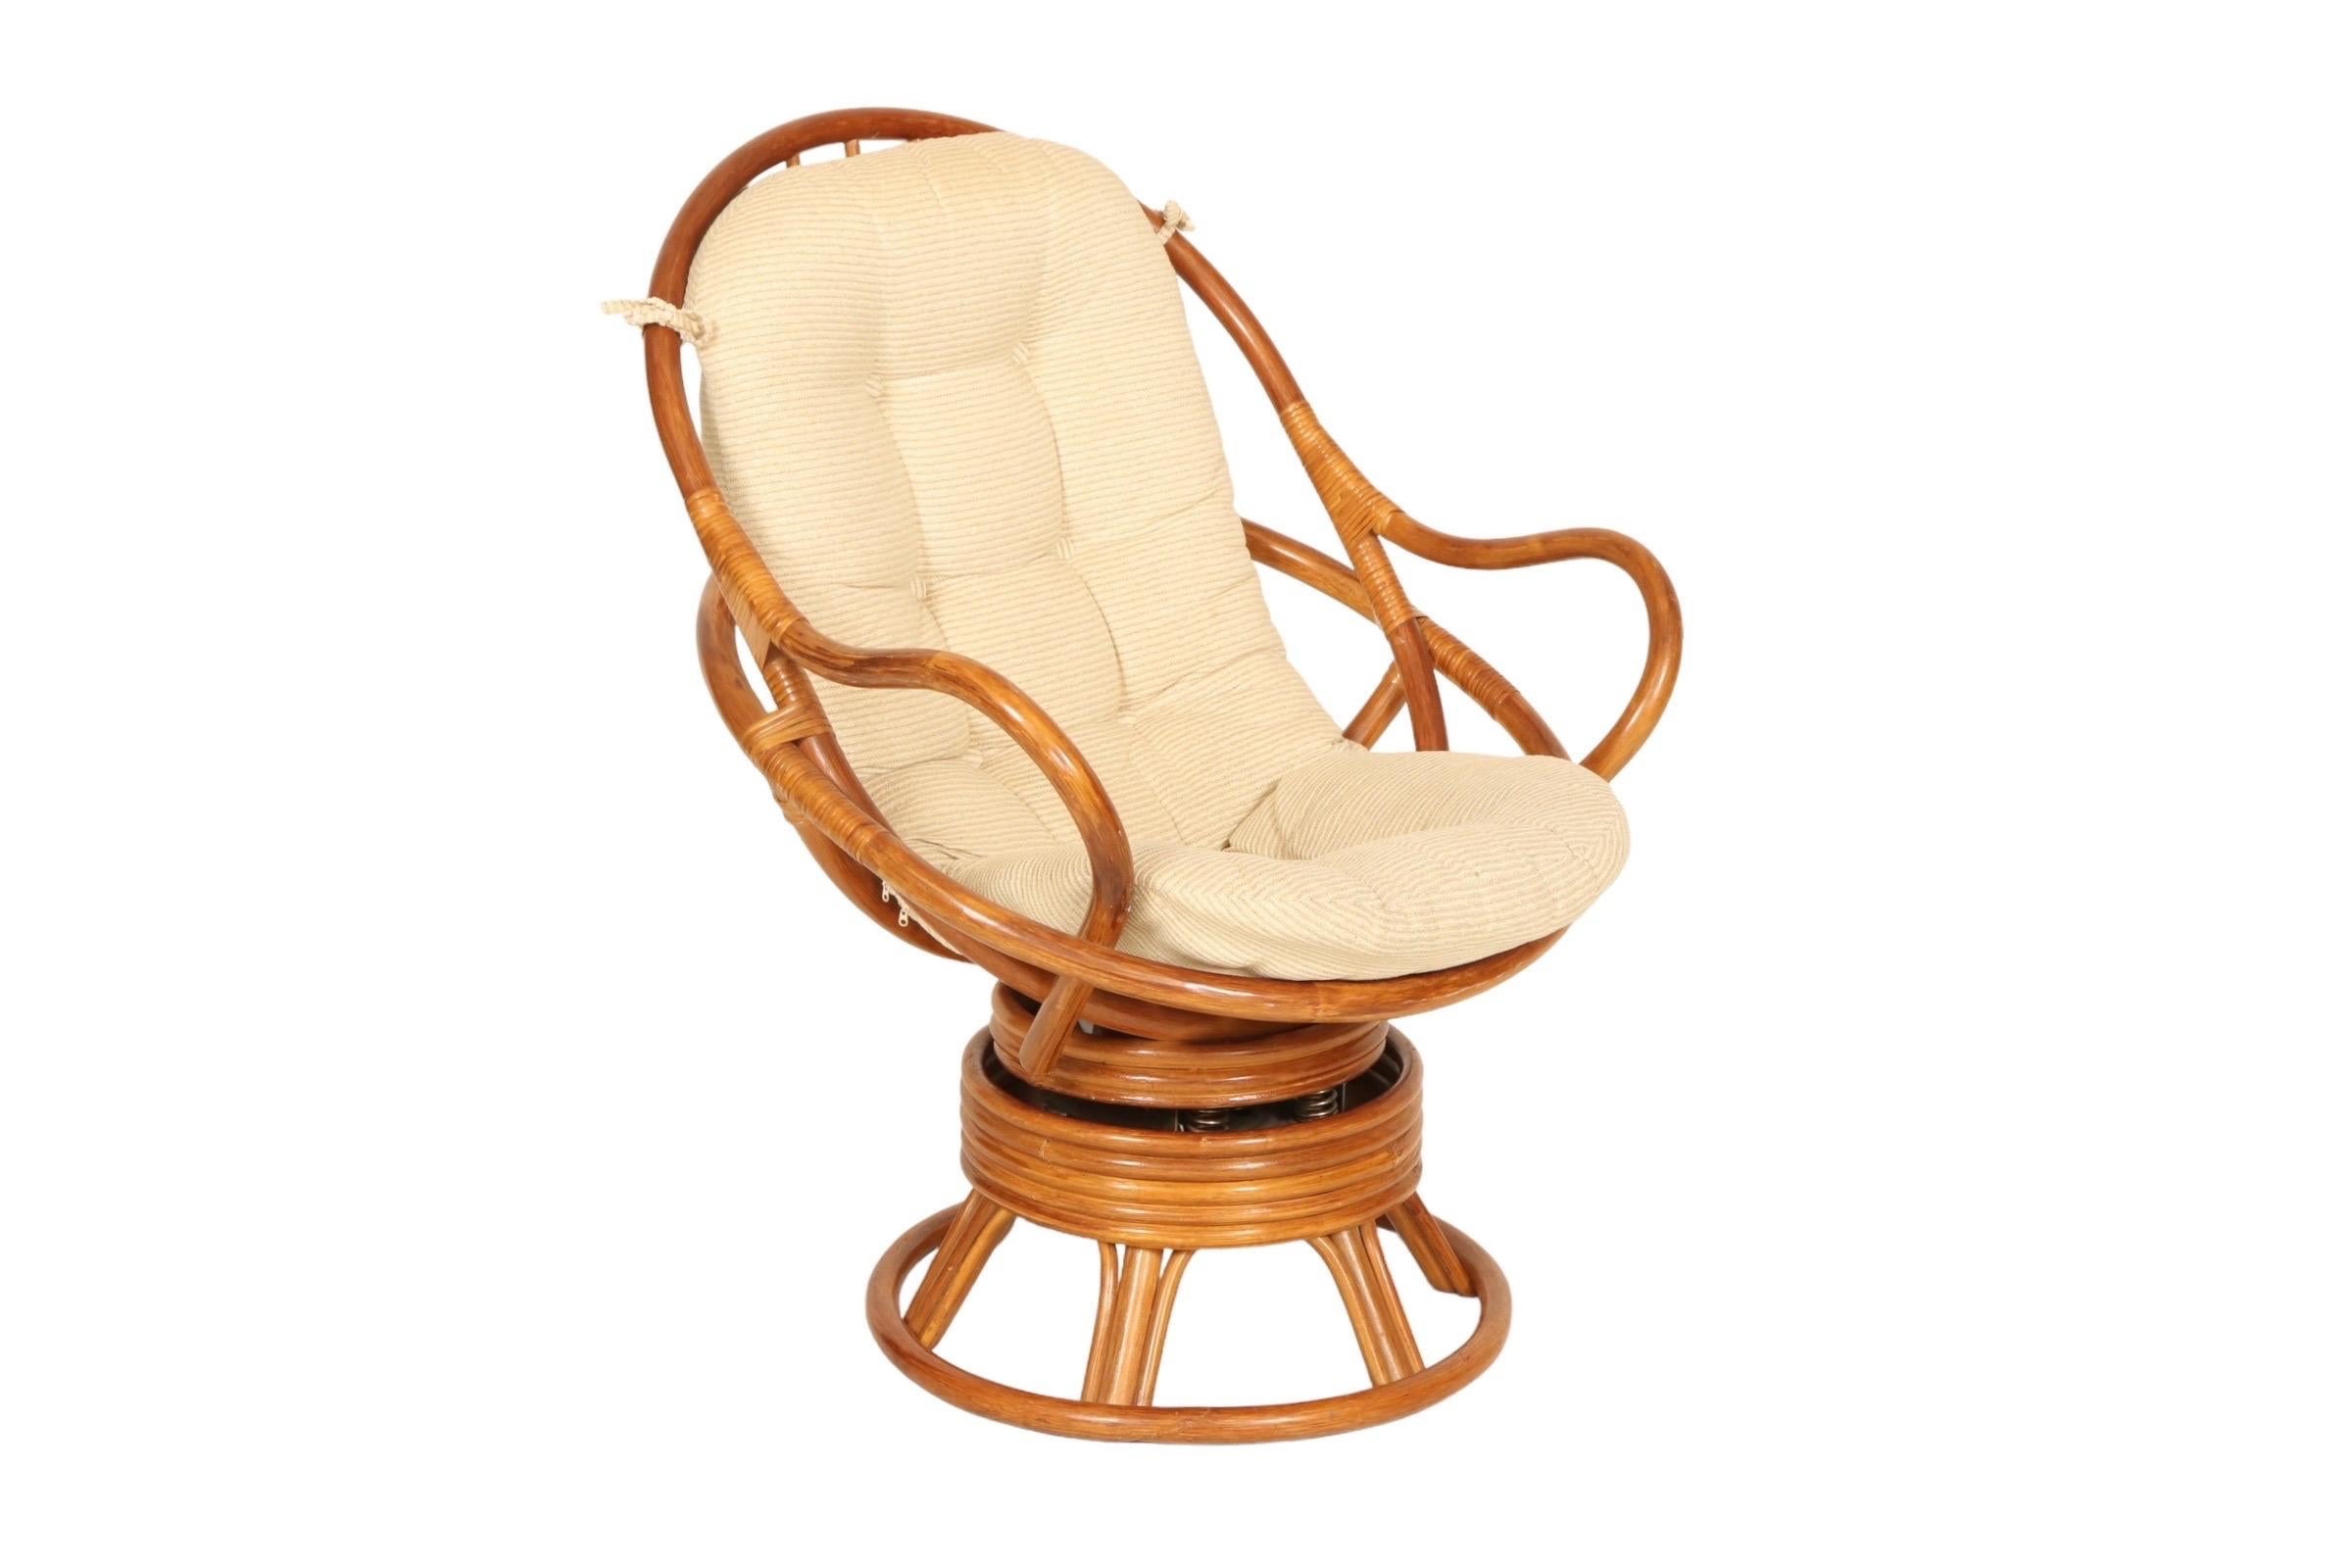 A Mid-Century Modern Papasan style bamboo lounge chair that swivels and rocks, made by Grand Basket Company Inc. Bentwood bamboo curves to form a gentle egg shape with round armrests, secured at the joins with rattan. The round pedestal base is made